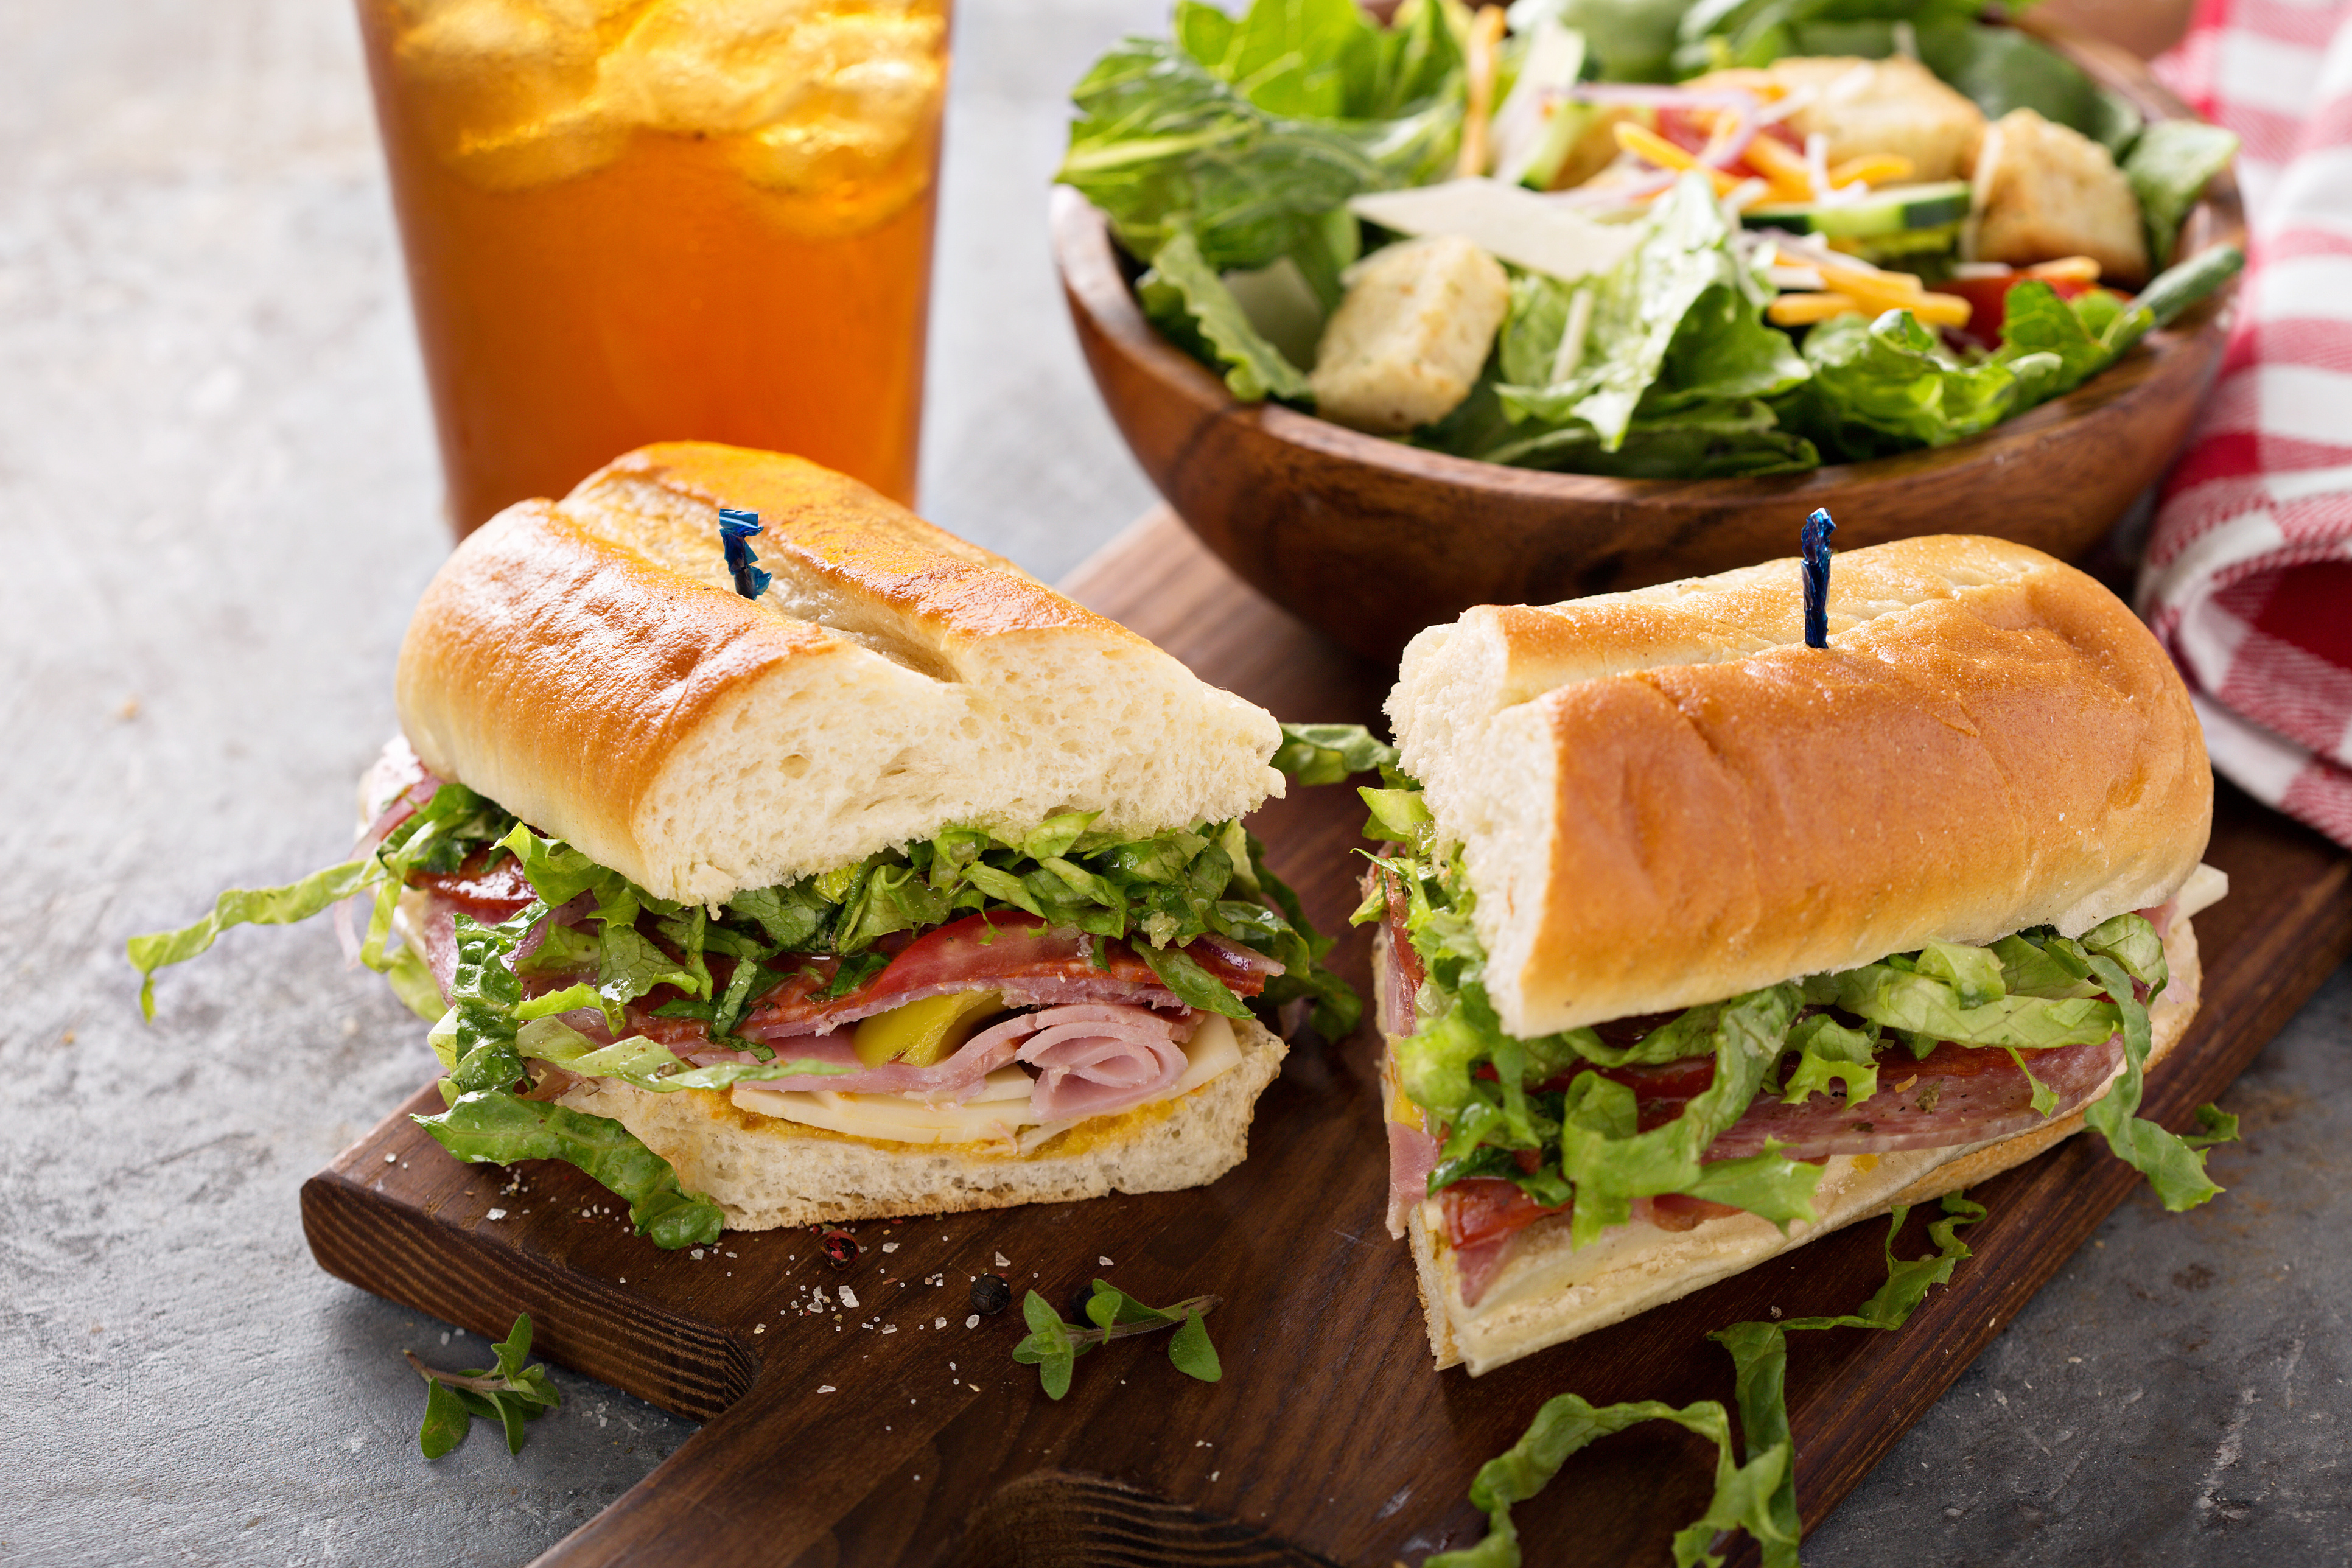 Sandwiches & Subs Restaurant For Sale in Waterloo Region